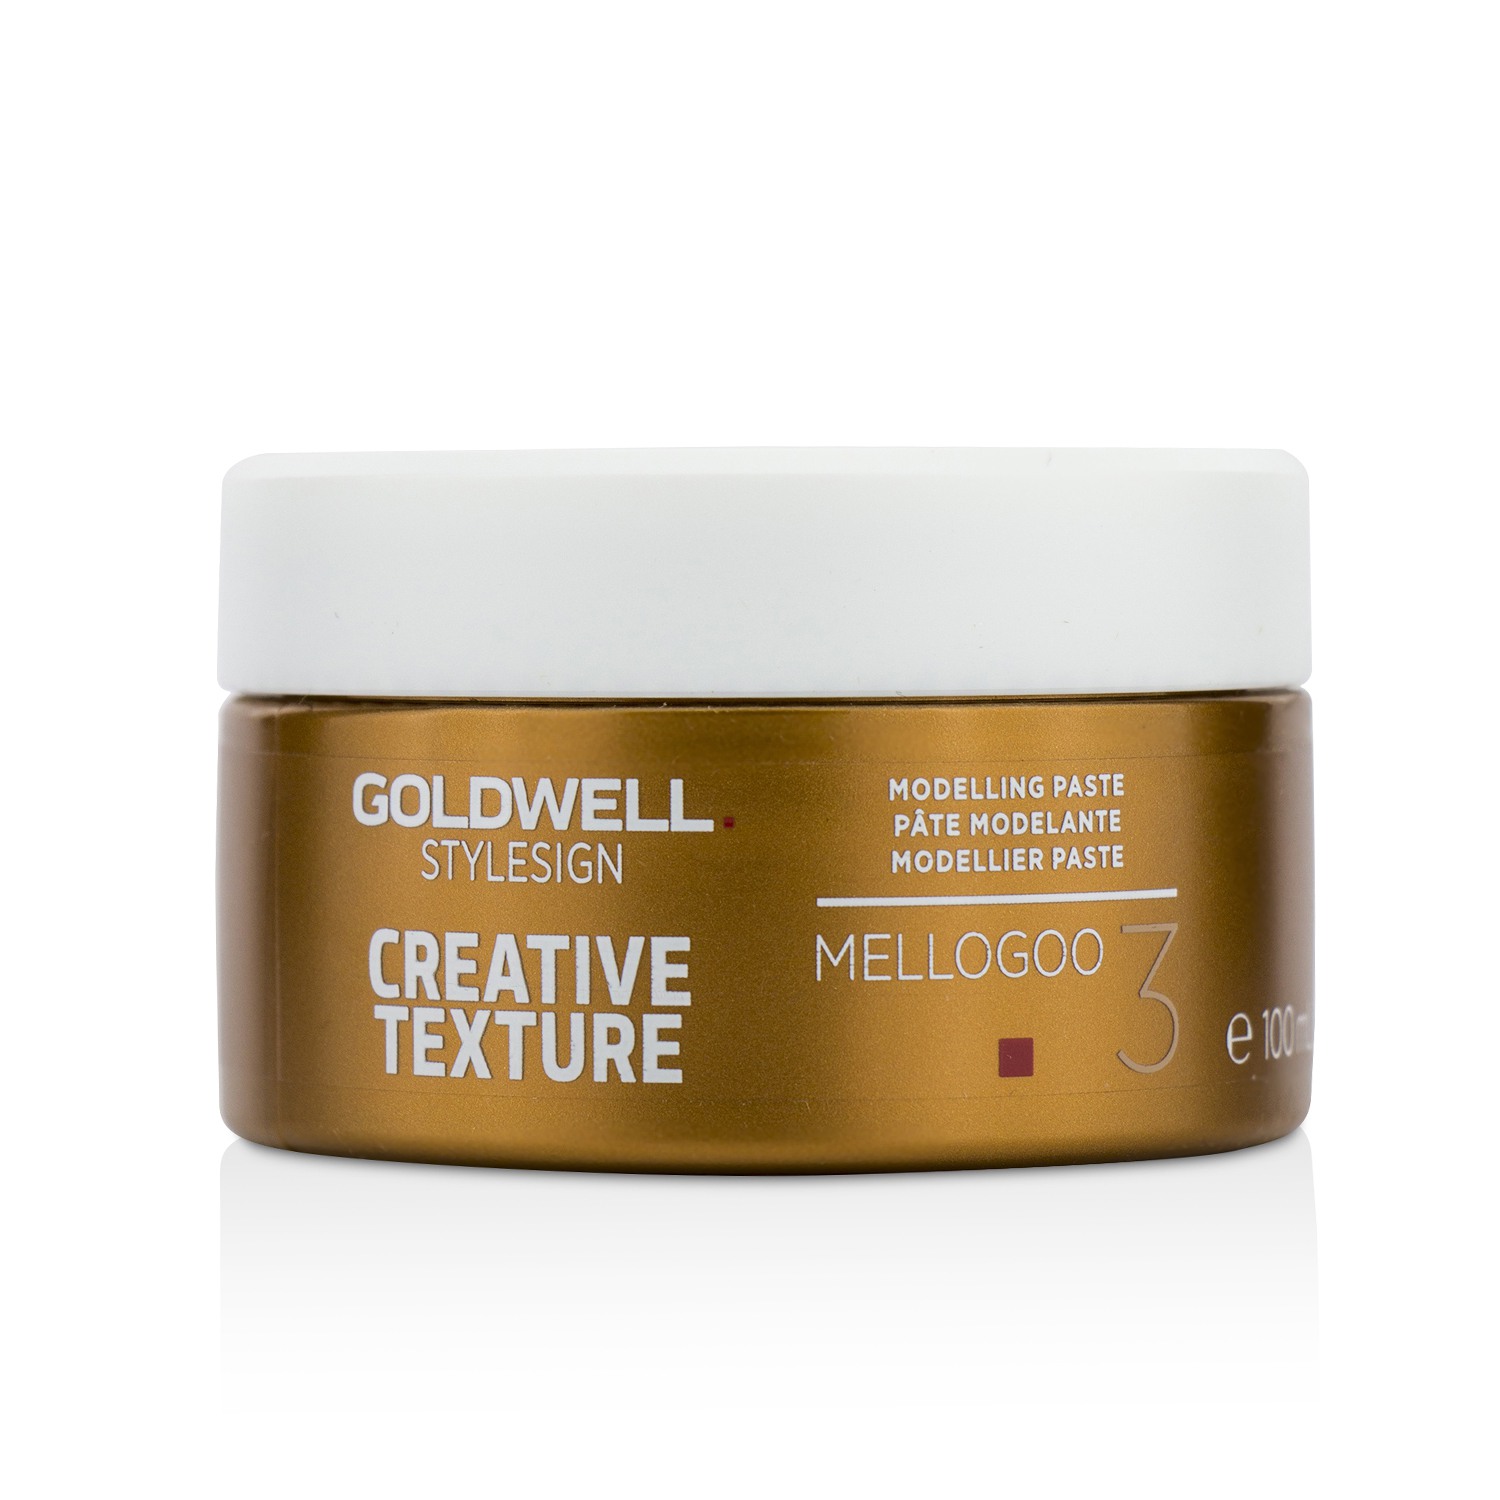 Style Sign Creative Texture Mellogoo 3 Modelling Paste Goldwell Image